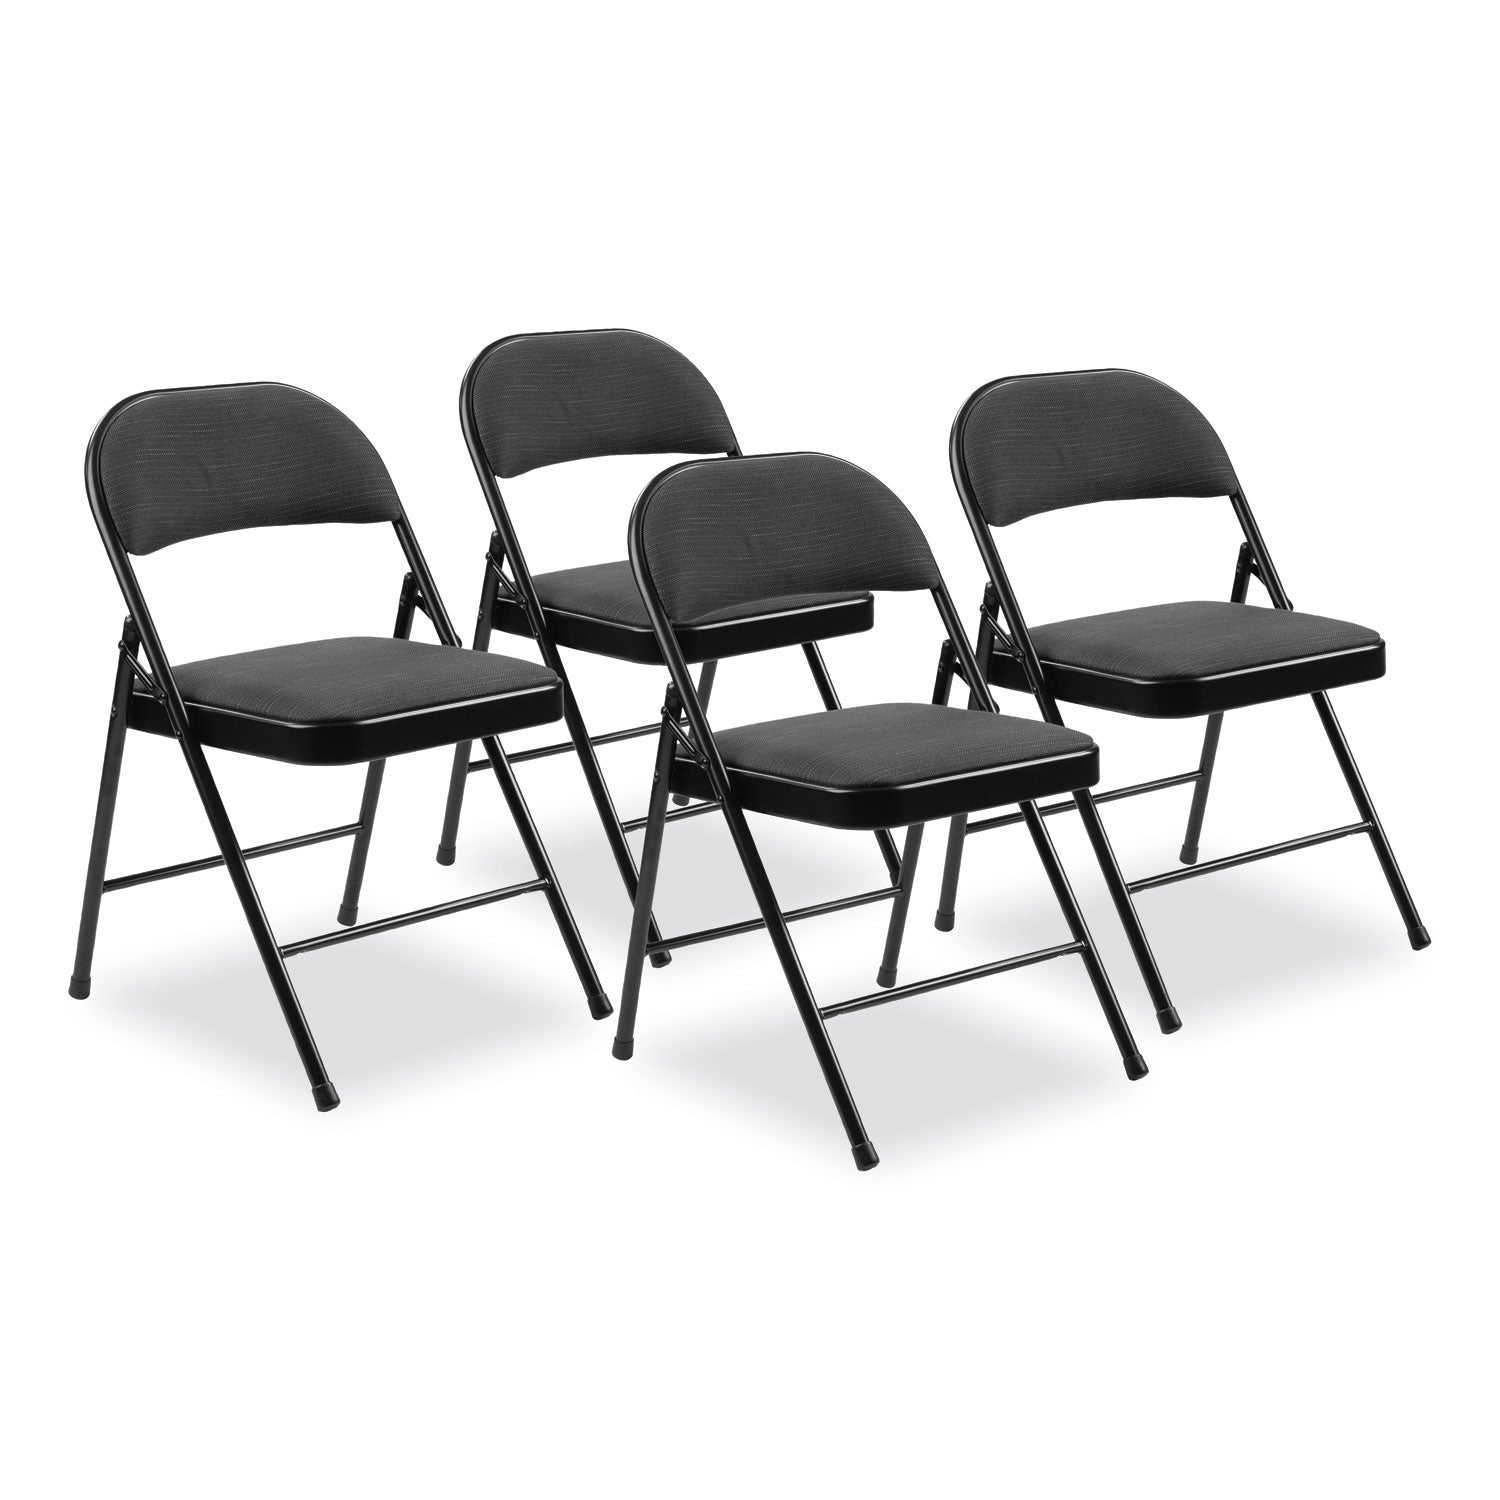 970-series-fabric-padded-steel-folding-chair-supports-250-lb-1775-seat-ht-star-trail-black-4-ct-ships-in-1-3-bus-days_nps970 - 1